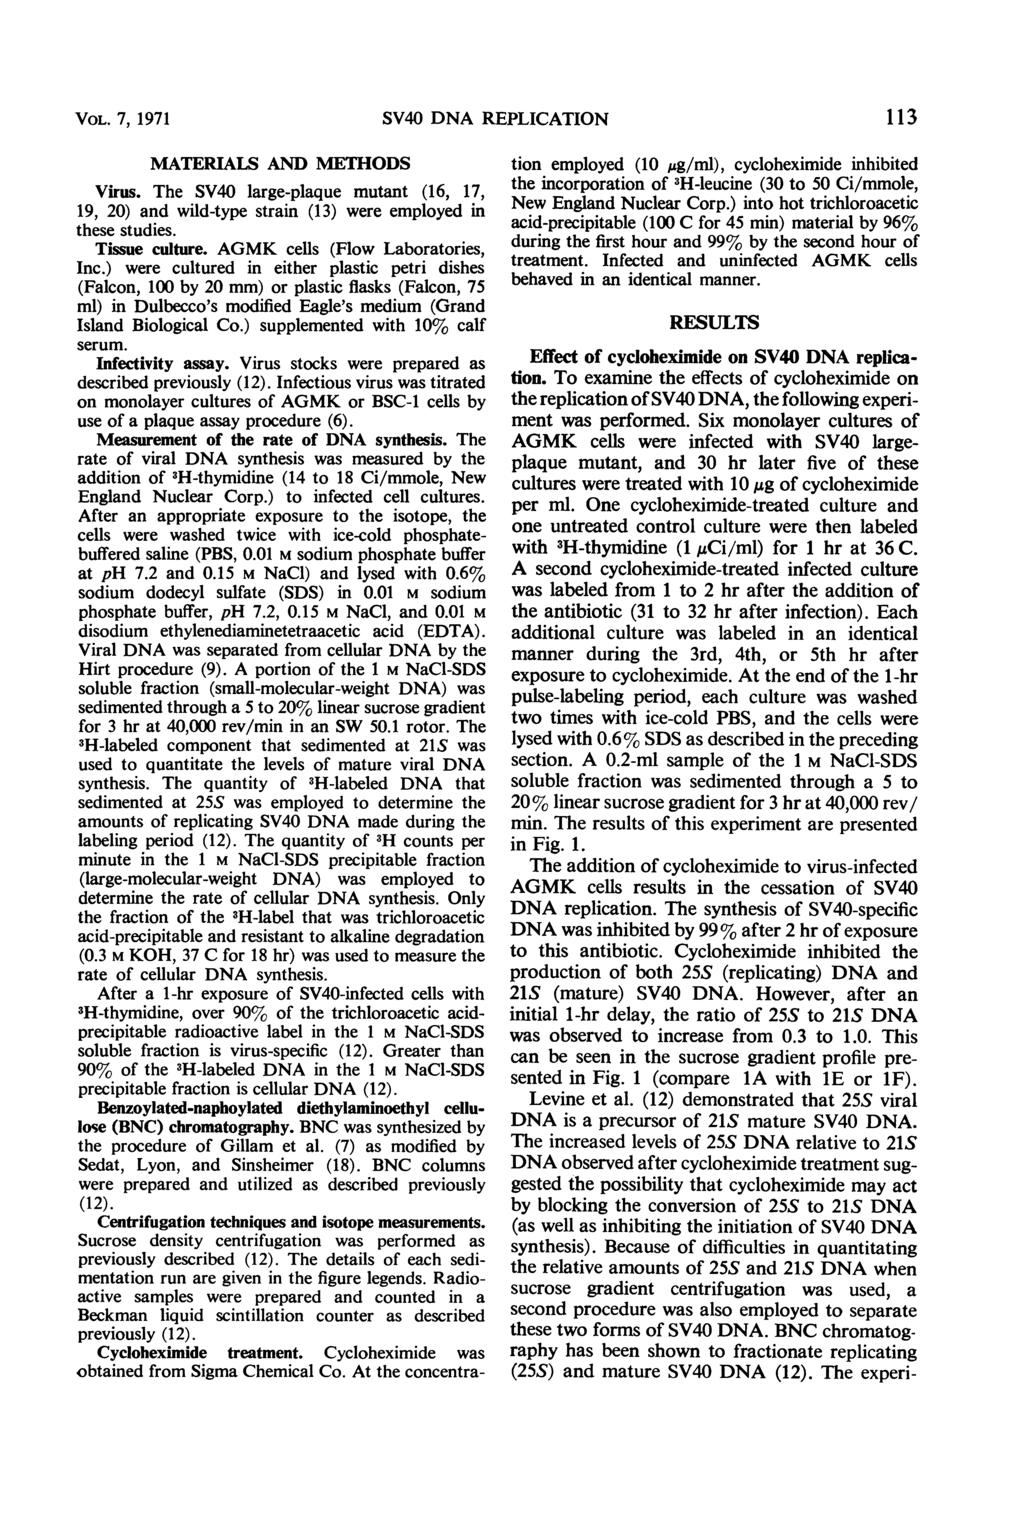 VOL. 7, 1971 SV40 DNA REPLICATION 113 MATERIALS AND METHODS Virus. The SV40 large-plaque mutant (16, 17, 19, 20) and wild-type strain (13) were employed in these studies. Tissue culture.